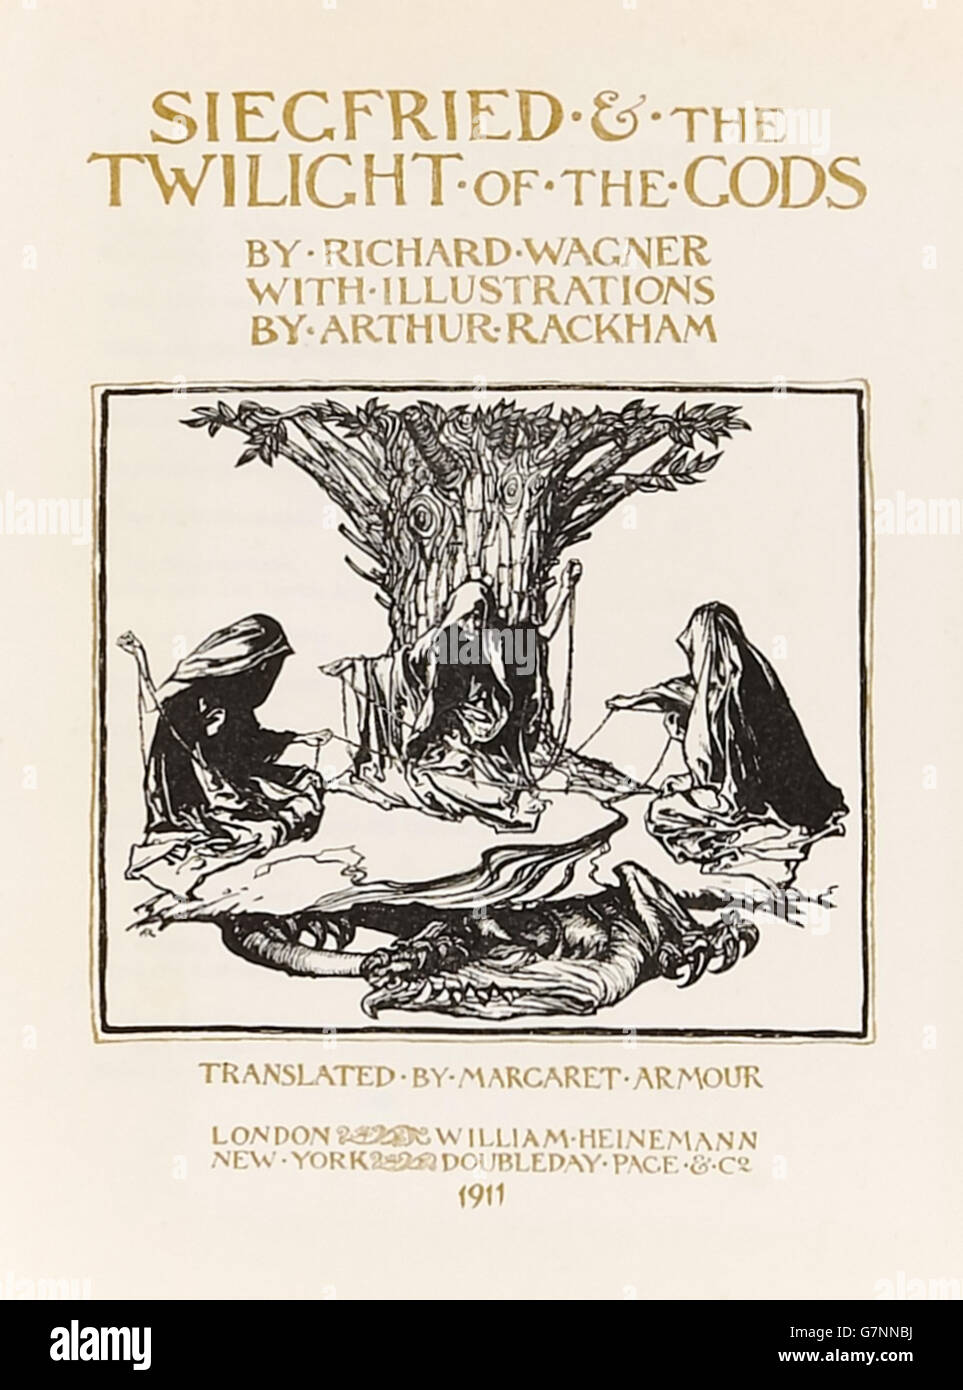 Title page from first edition of 'Siegfried & The Twilight of the Gods' illustrated by Arthur Rackham (1867-1939) published in 1911 showing the Three Norns spinning the threads of fate at the foot of Yggdrasil, the tree of the world. . Stock Photo